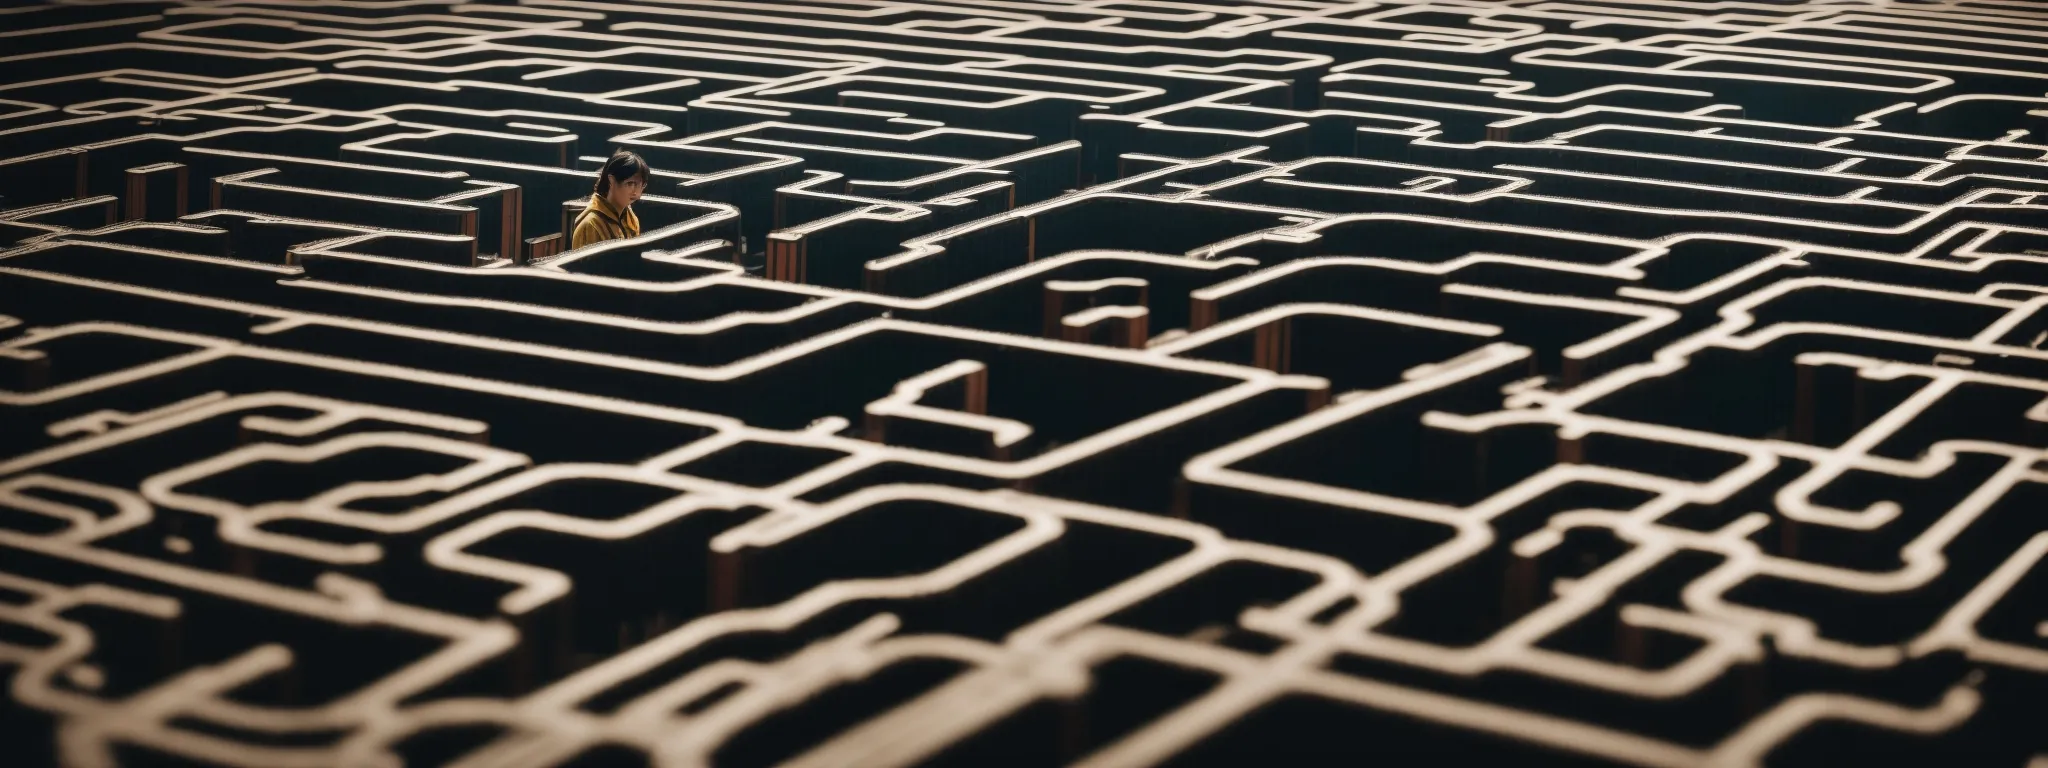 a person in front of a giant, intricately structured maze resembling a circuit board, symbolizing the complexity and navigational challenge of understanding google's search algorithms.